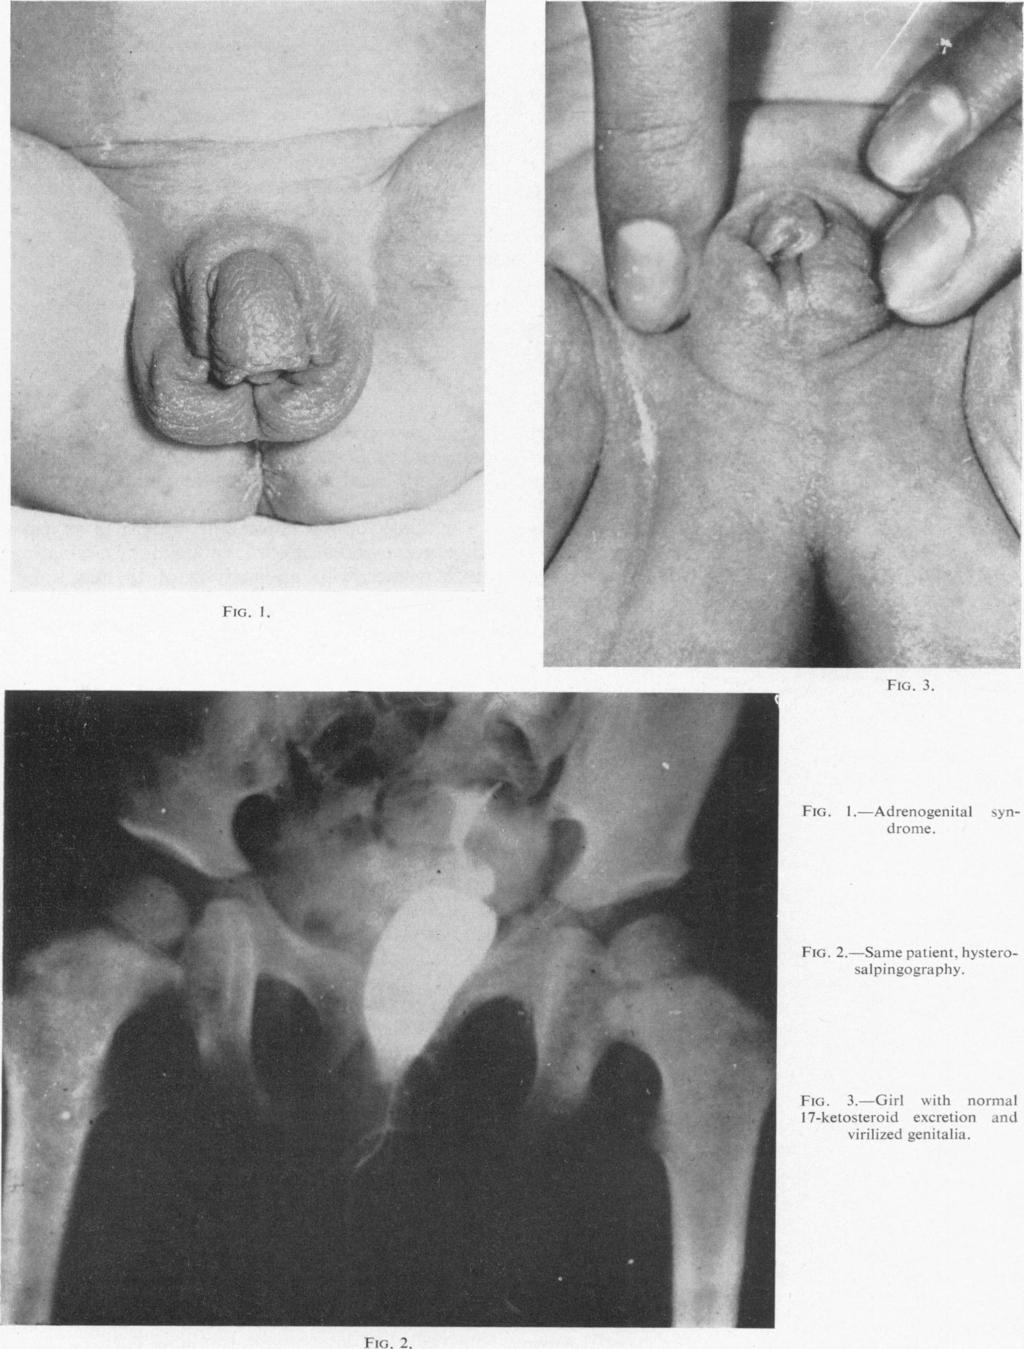 FiG,. 1. FiG. I.-Adrenogenitail syn- Jri1o'me Fiu;. 2.-Same patient, hysterosalpingo-rapivy. Arch Dis Child: first published as 10.1136/adc.35.182.402 on 1 August 1960.